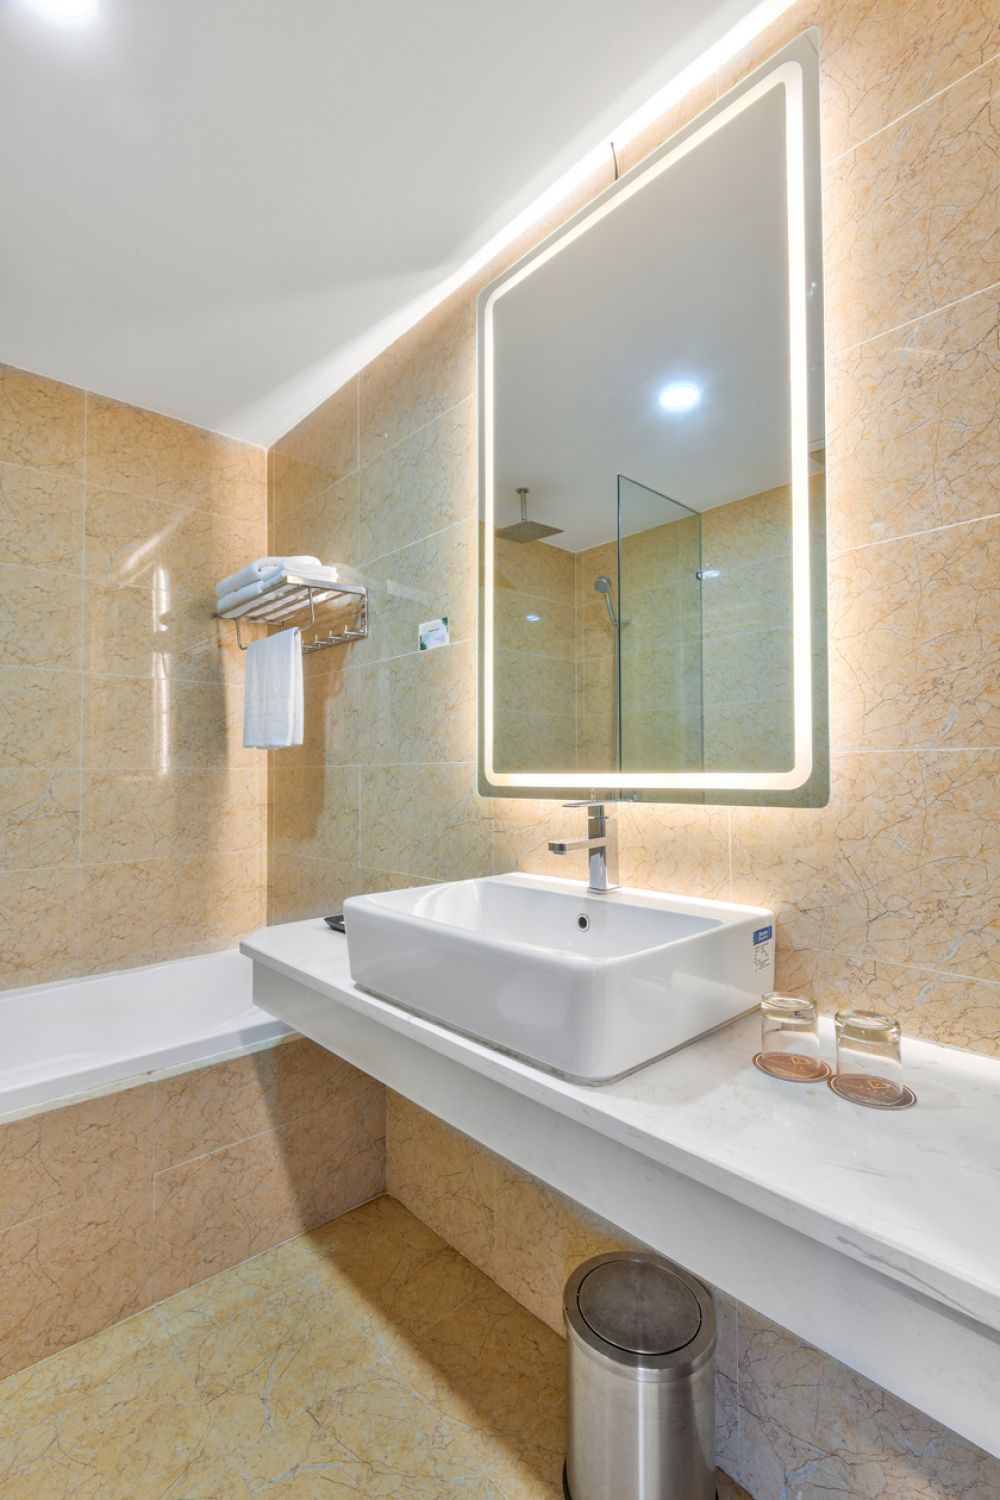 Premier SV with Balcony, Imperial Nha Trang Hotel 4*